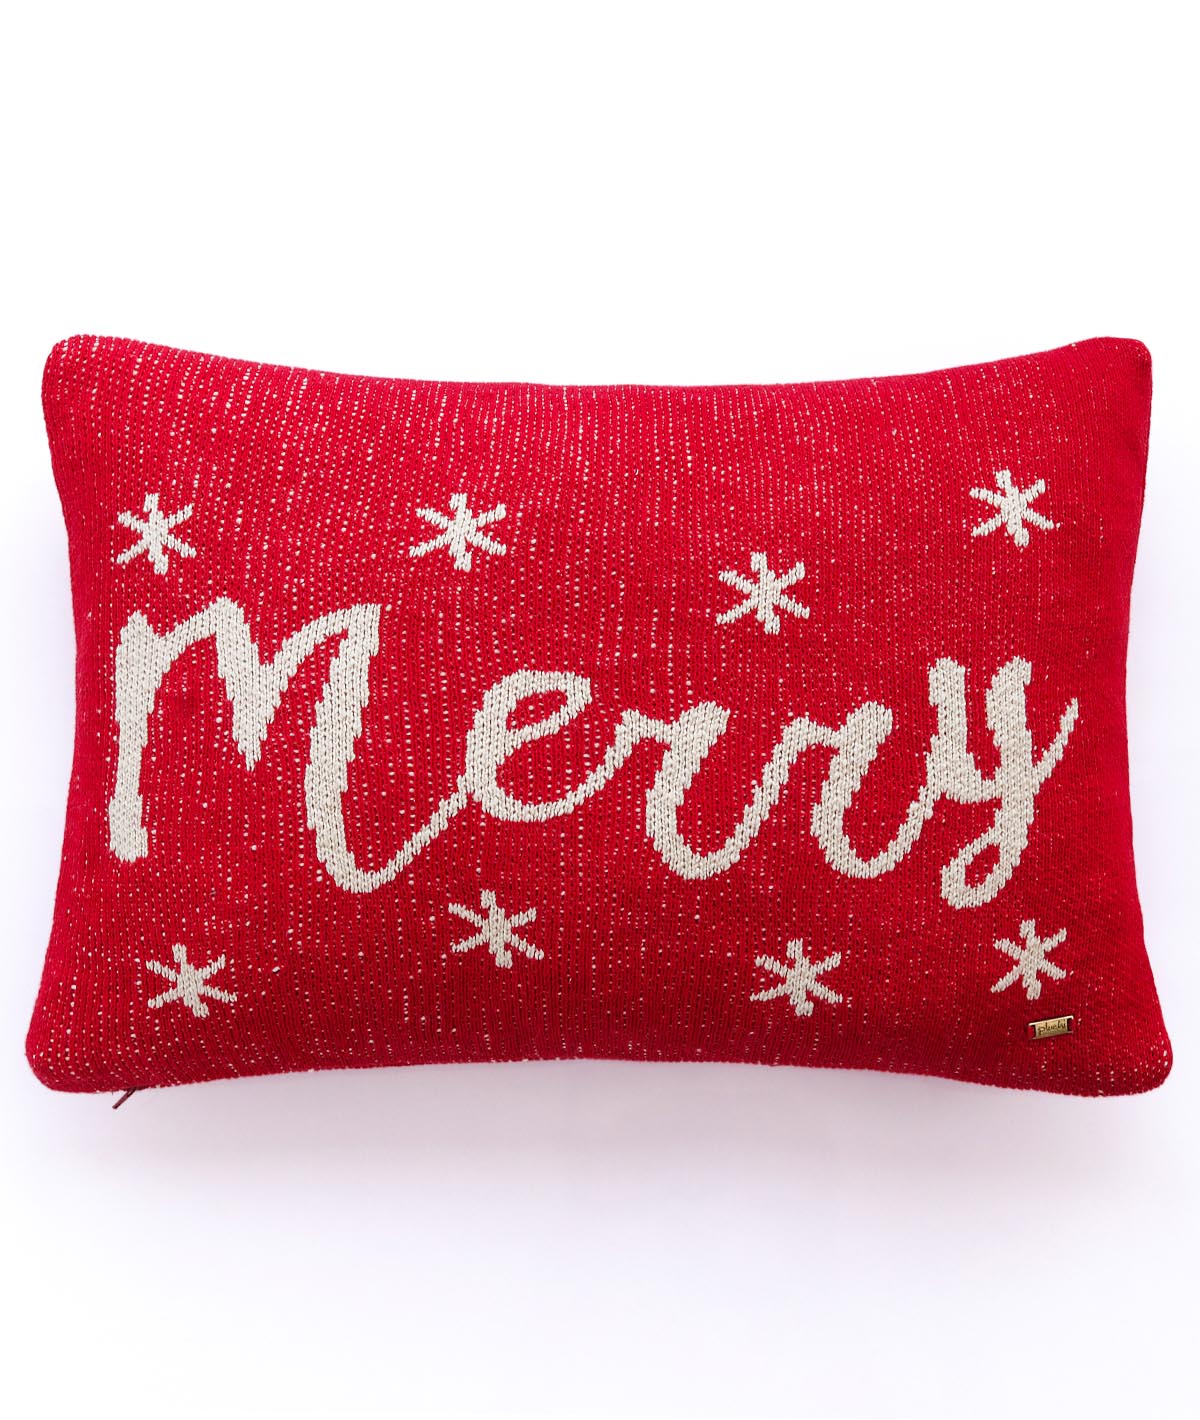 Merry Cotton Knitted Decorative Red Color 16 x 24 Inches Pillow Covers